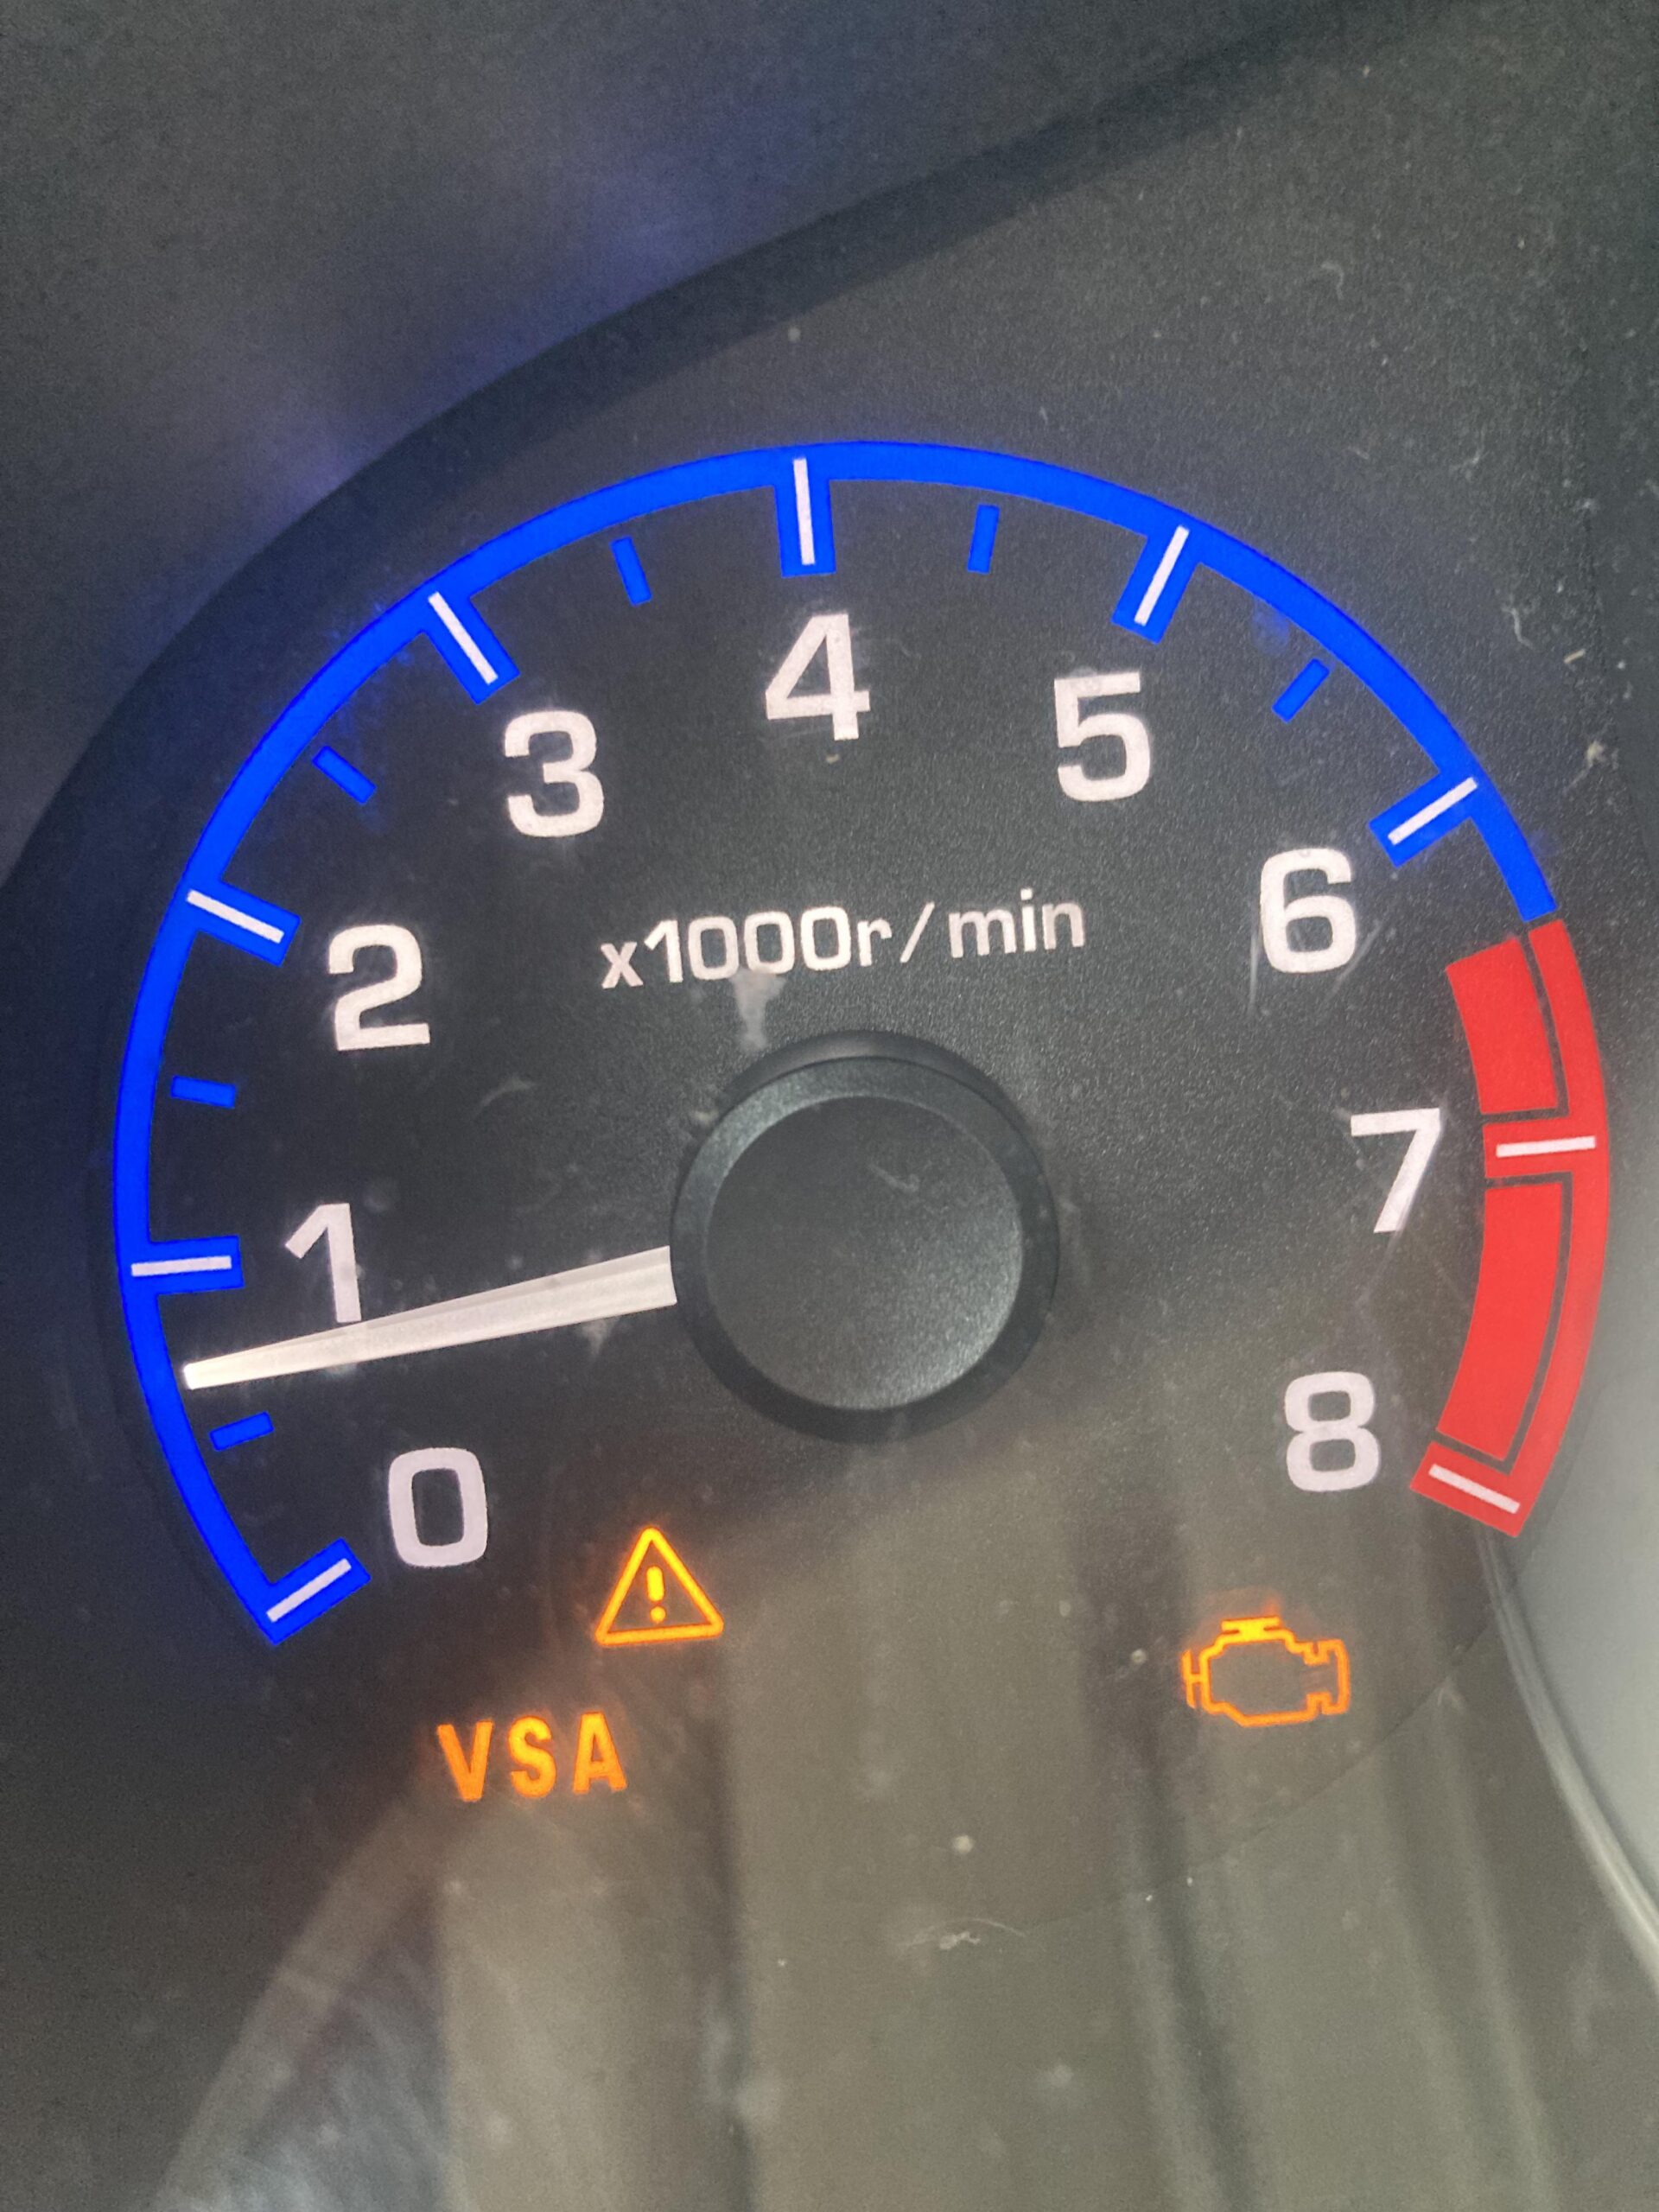 Why Does My Car Sputters When Accelerating But No Check Engine Light?